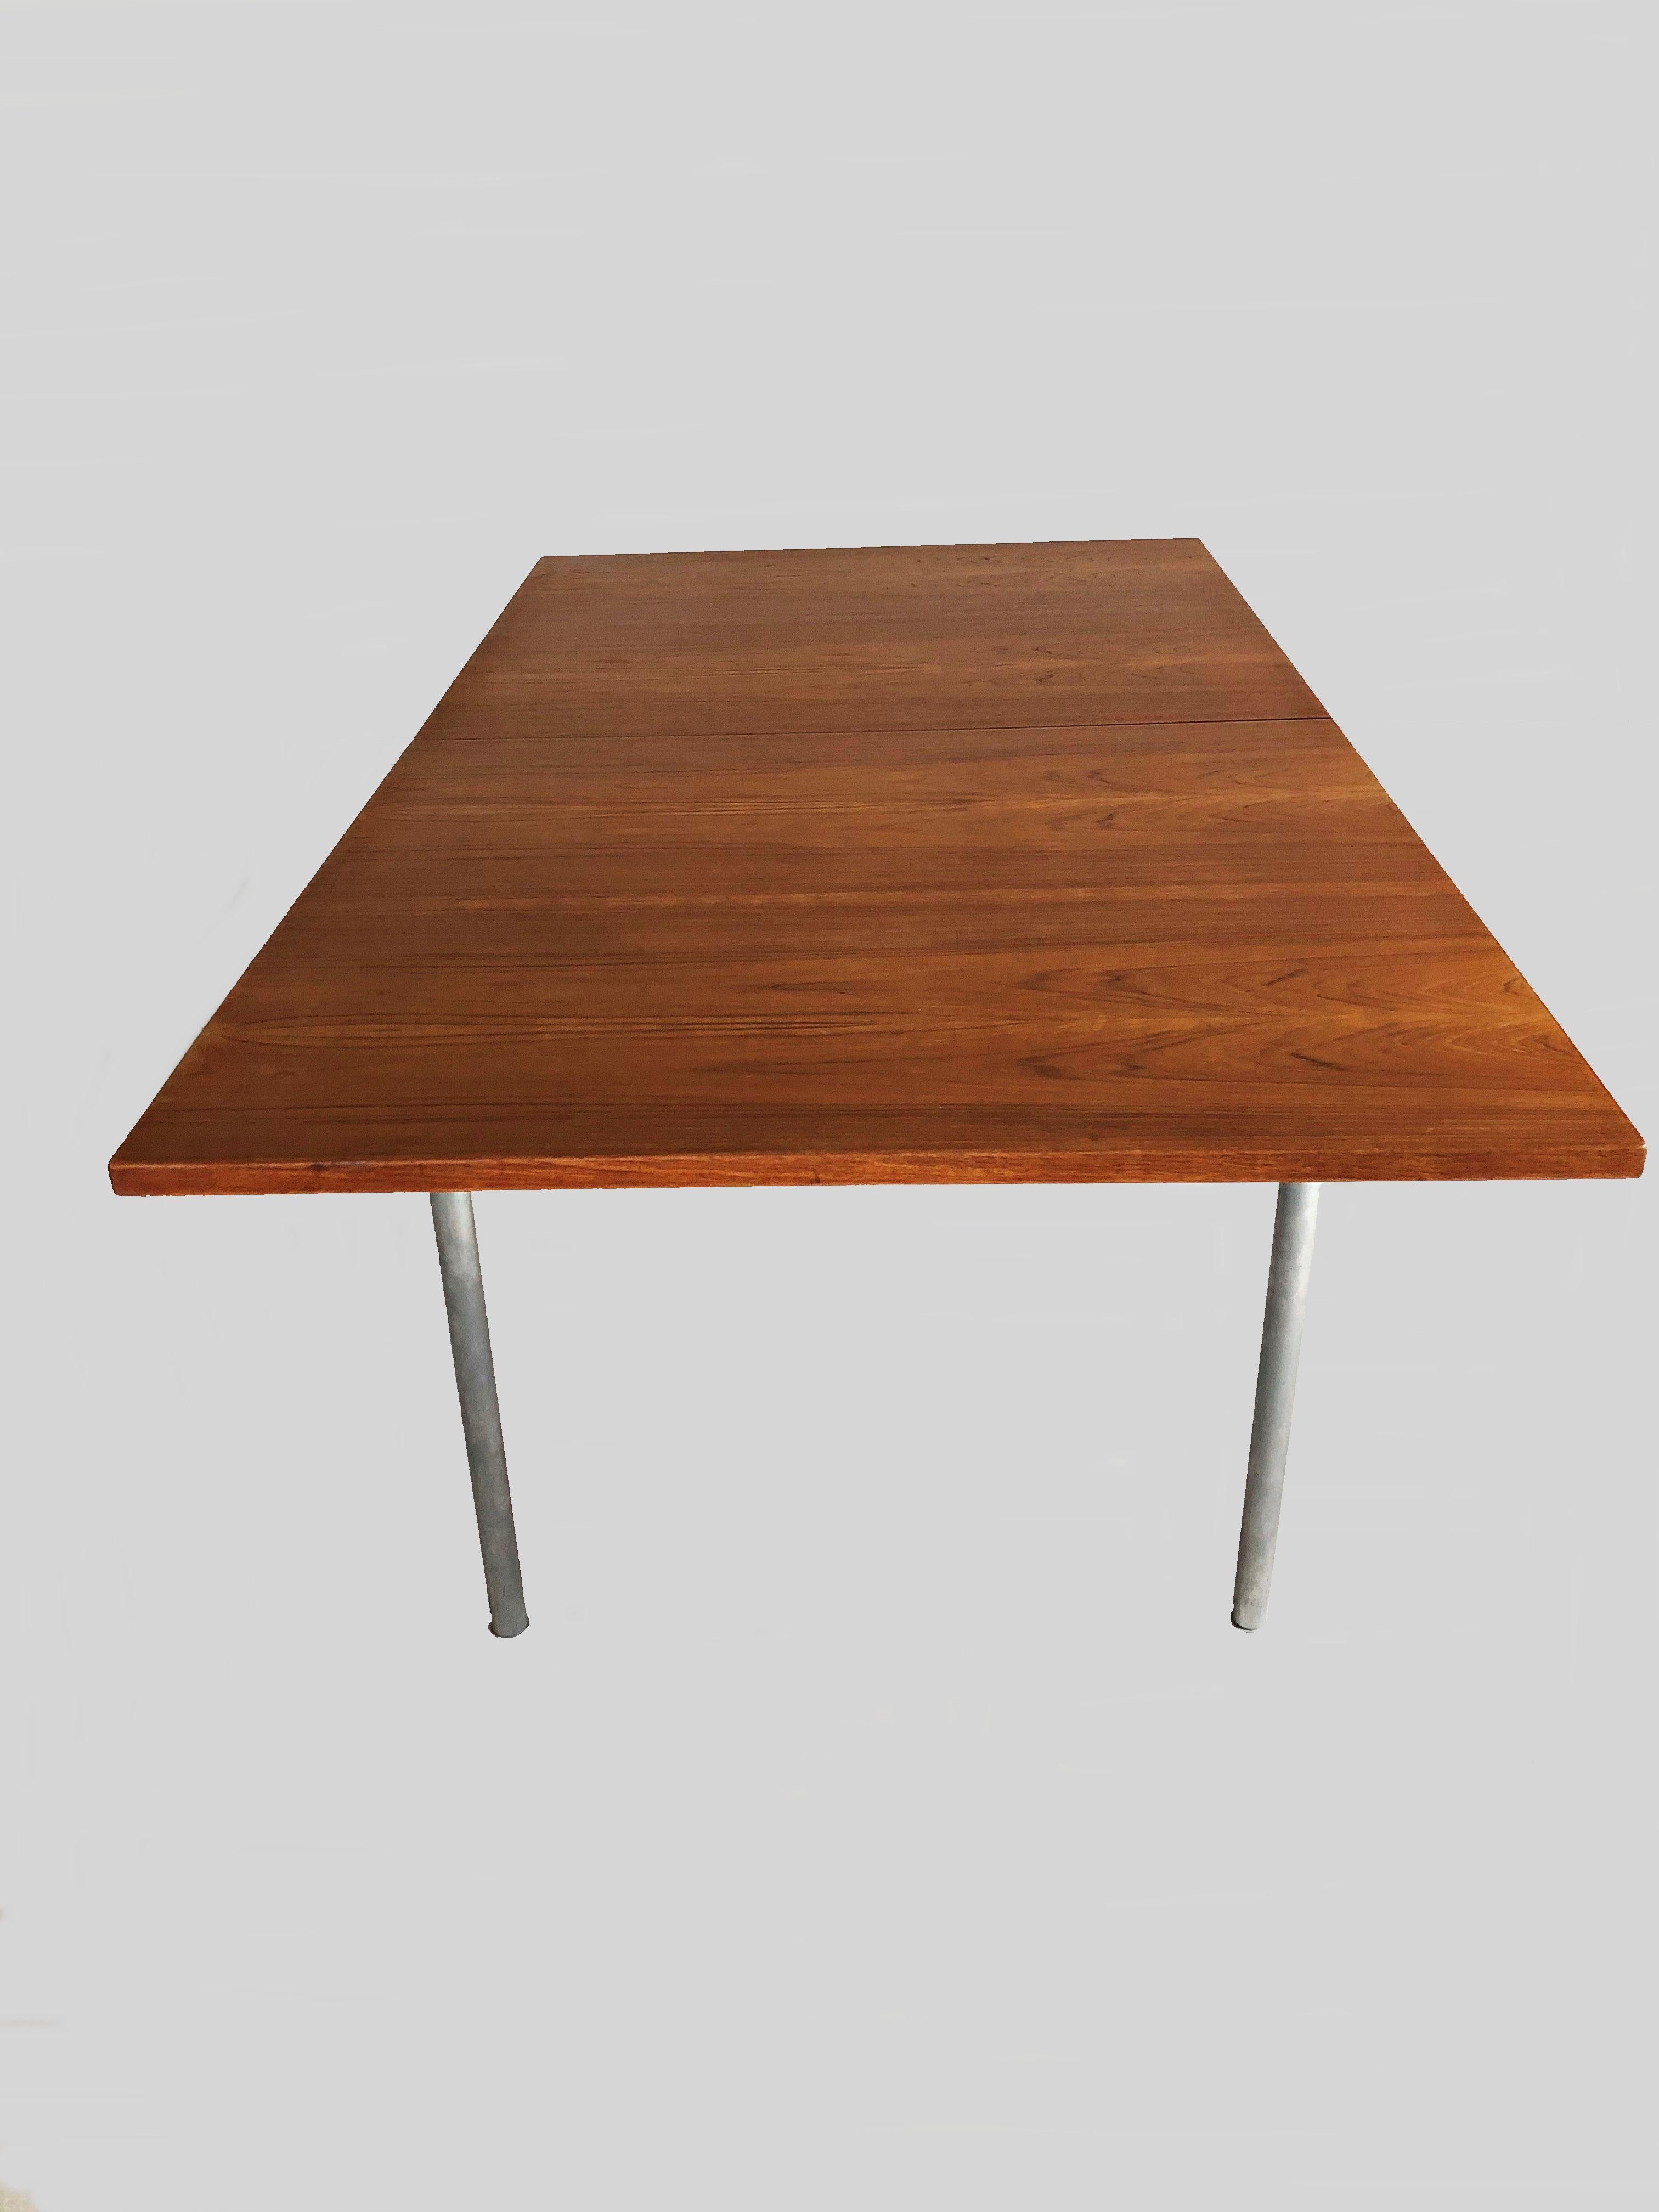 Steel 1960s Hans Wegner Refinished Extension Dining Table in Teak by Andreas Tuck